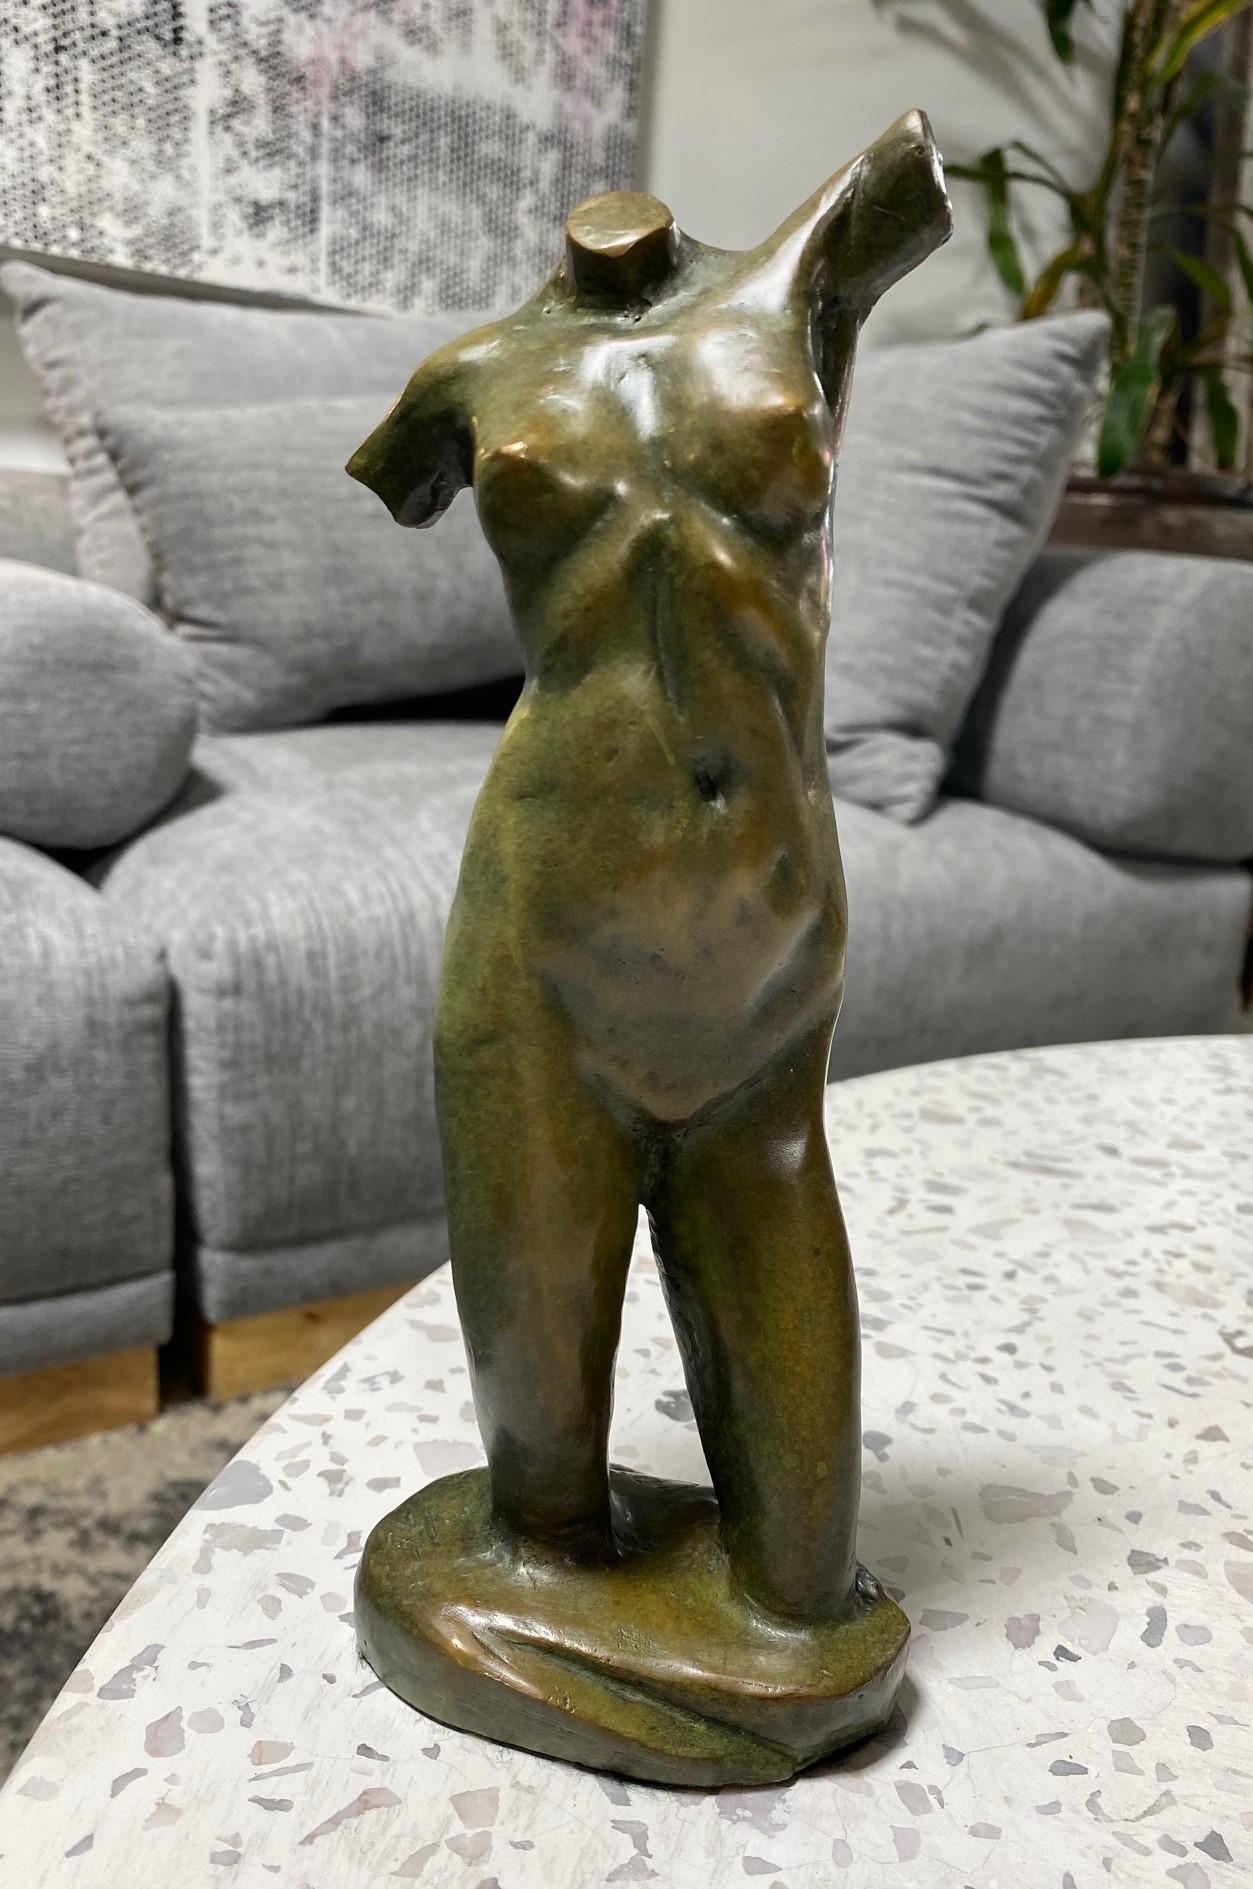 A wonderful work by renowned American artist/ sculptor Tom Corbin. This piece of a figurative nude female/woman is titled Reaching Torso and features a fantastic rich green/brown patina. 

The limited edition work is signed, dated (2001), and